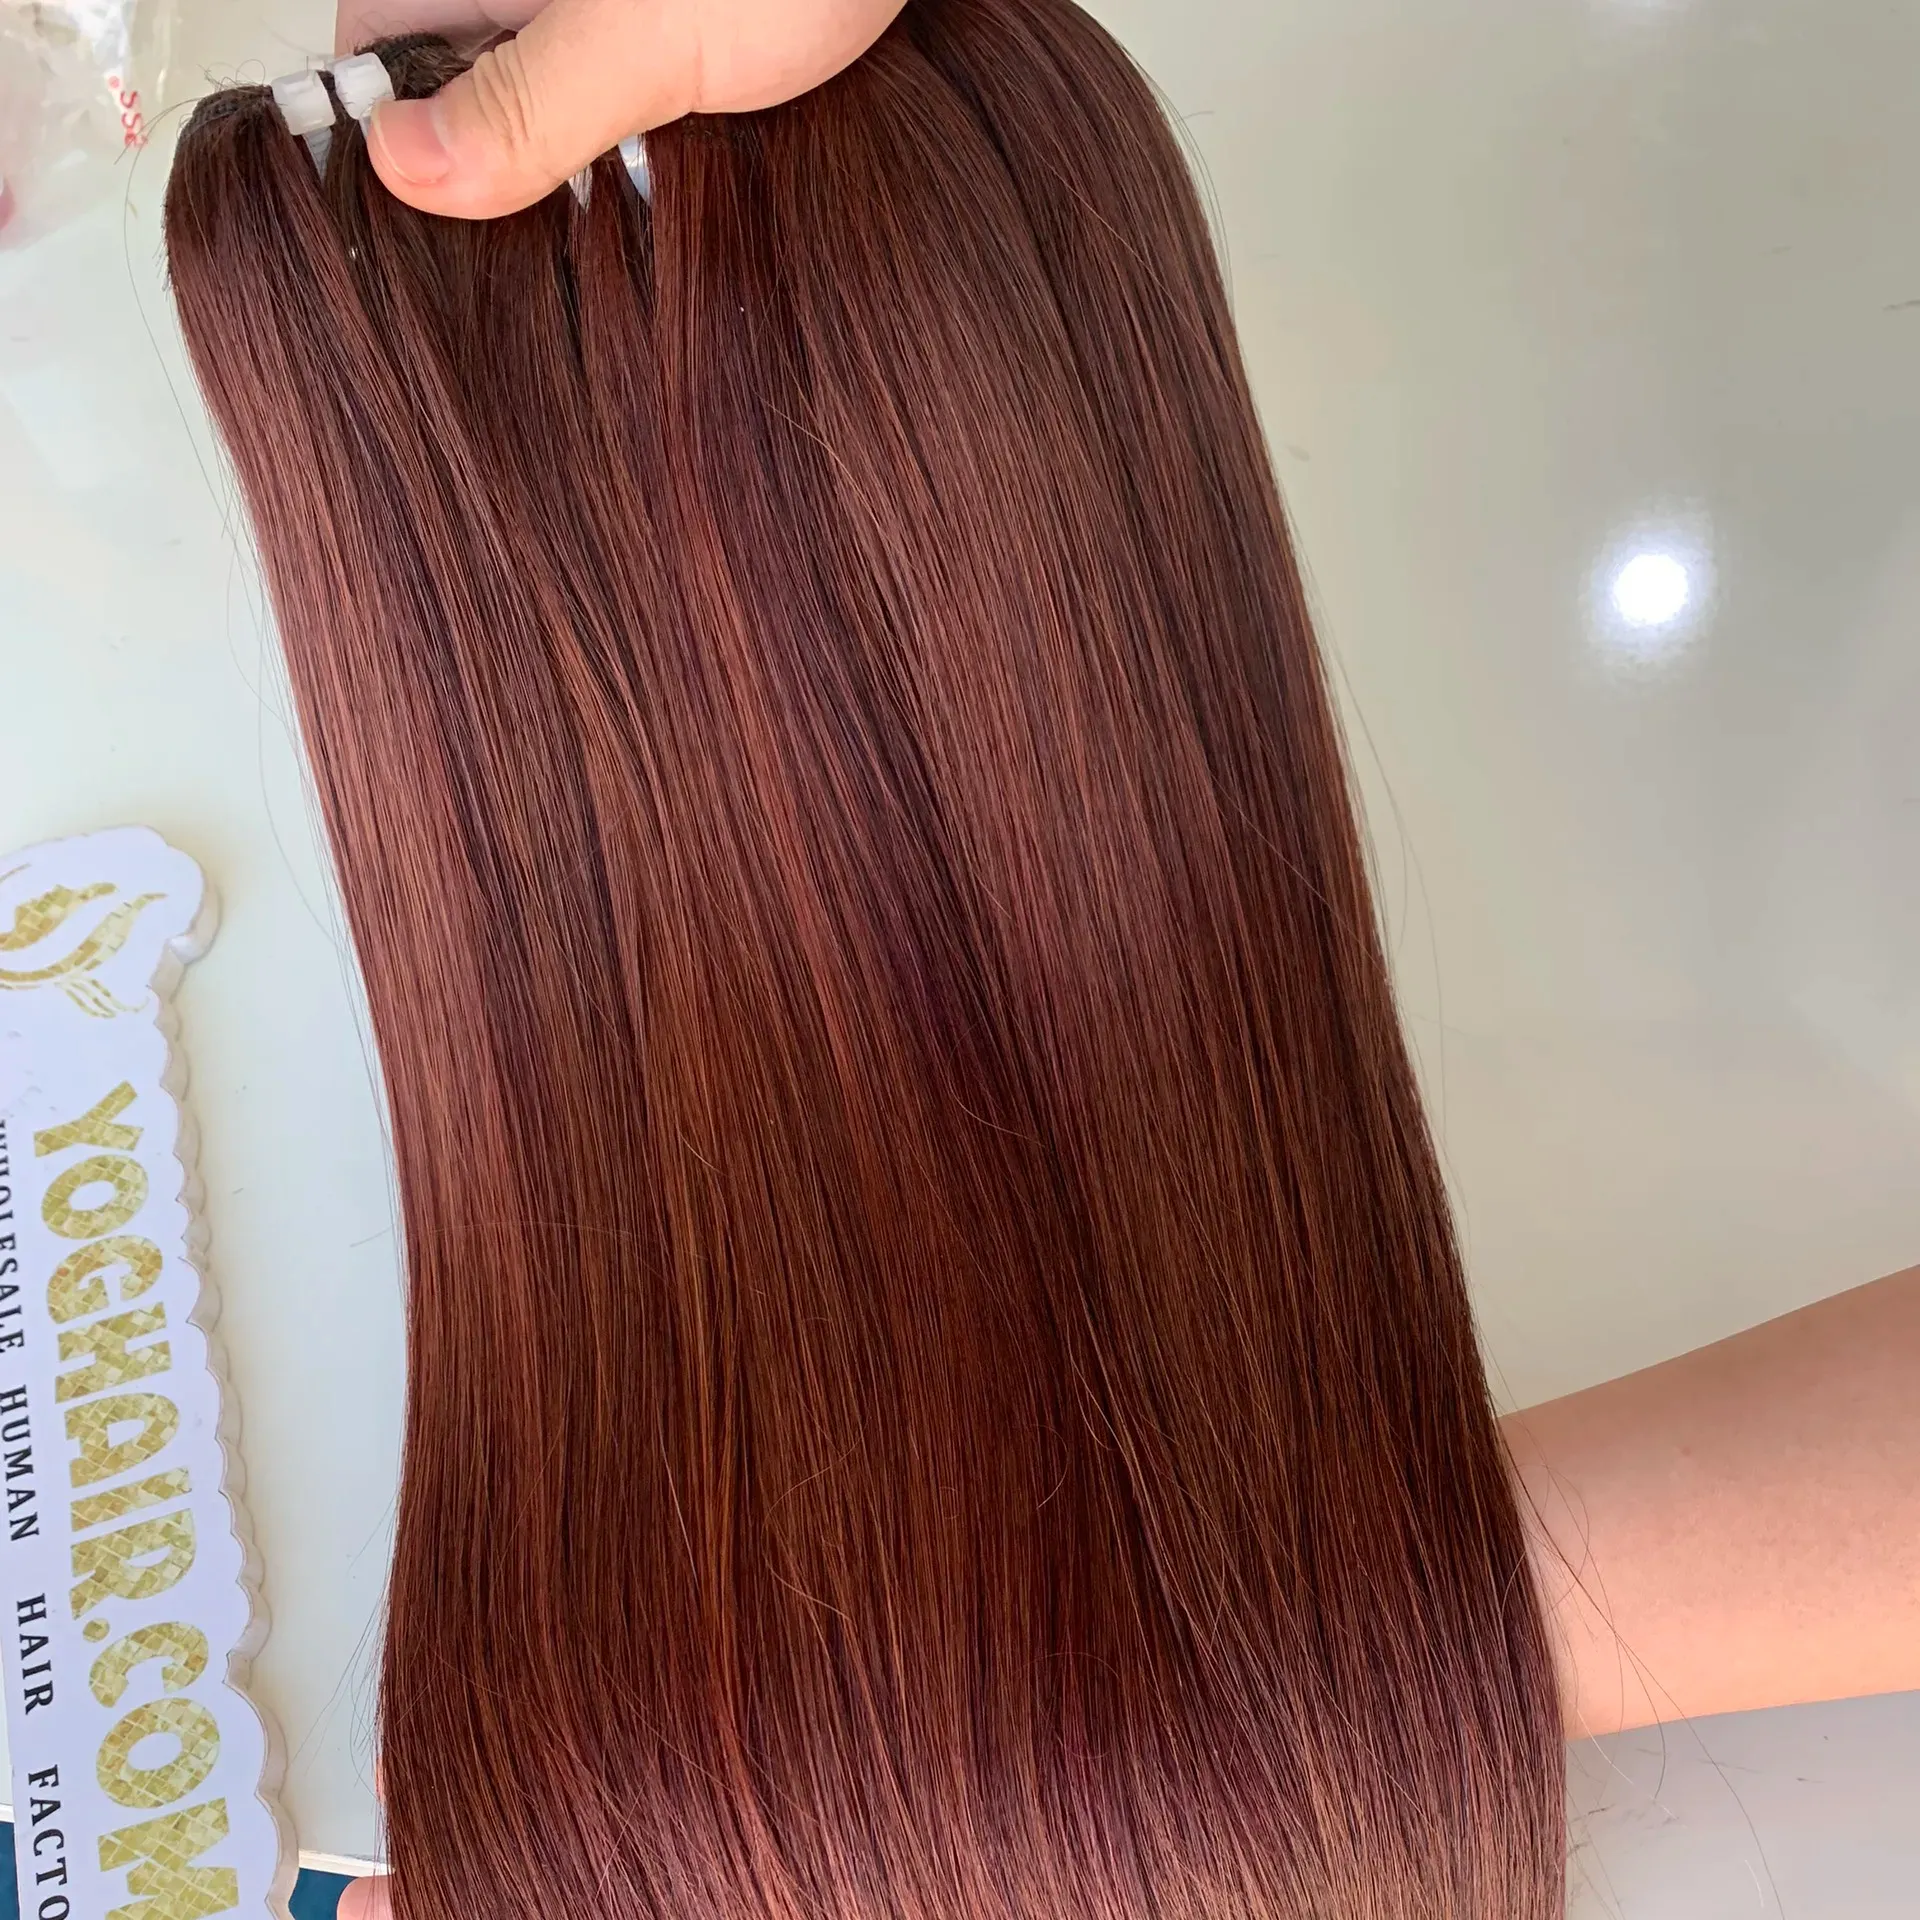 Weft Hair Extensions Long Straight 100% Vietnam Human Hair All length Options Wholesale Price From Yoghair Factory Fast Delivery